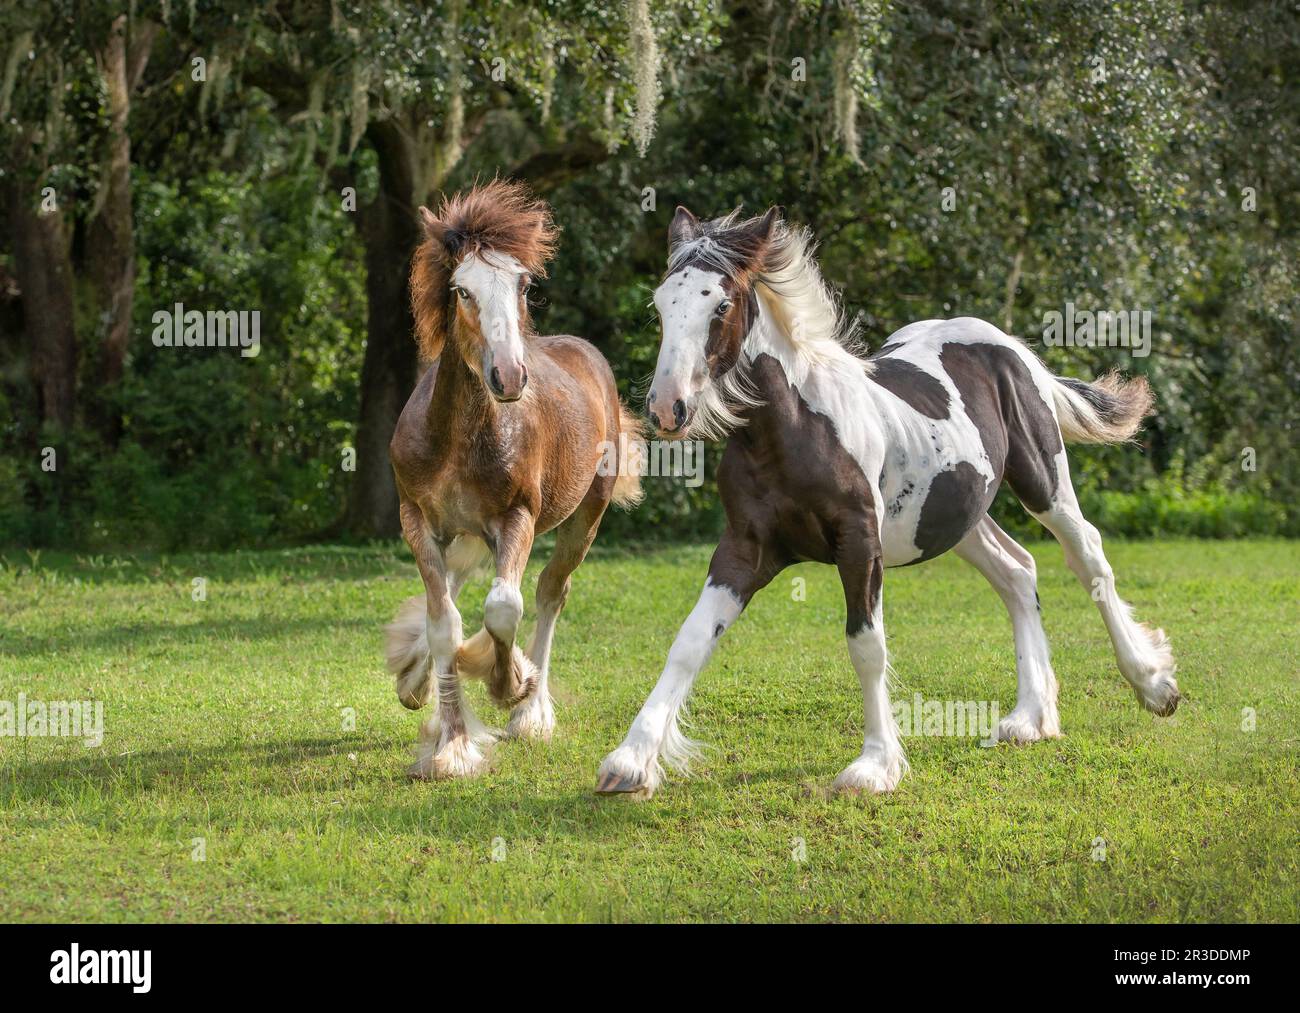 Weanling Gypsy Vanner Horse colt and filly foal buddies Stock Photo